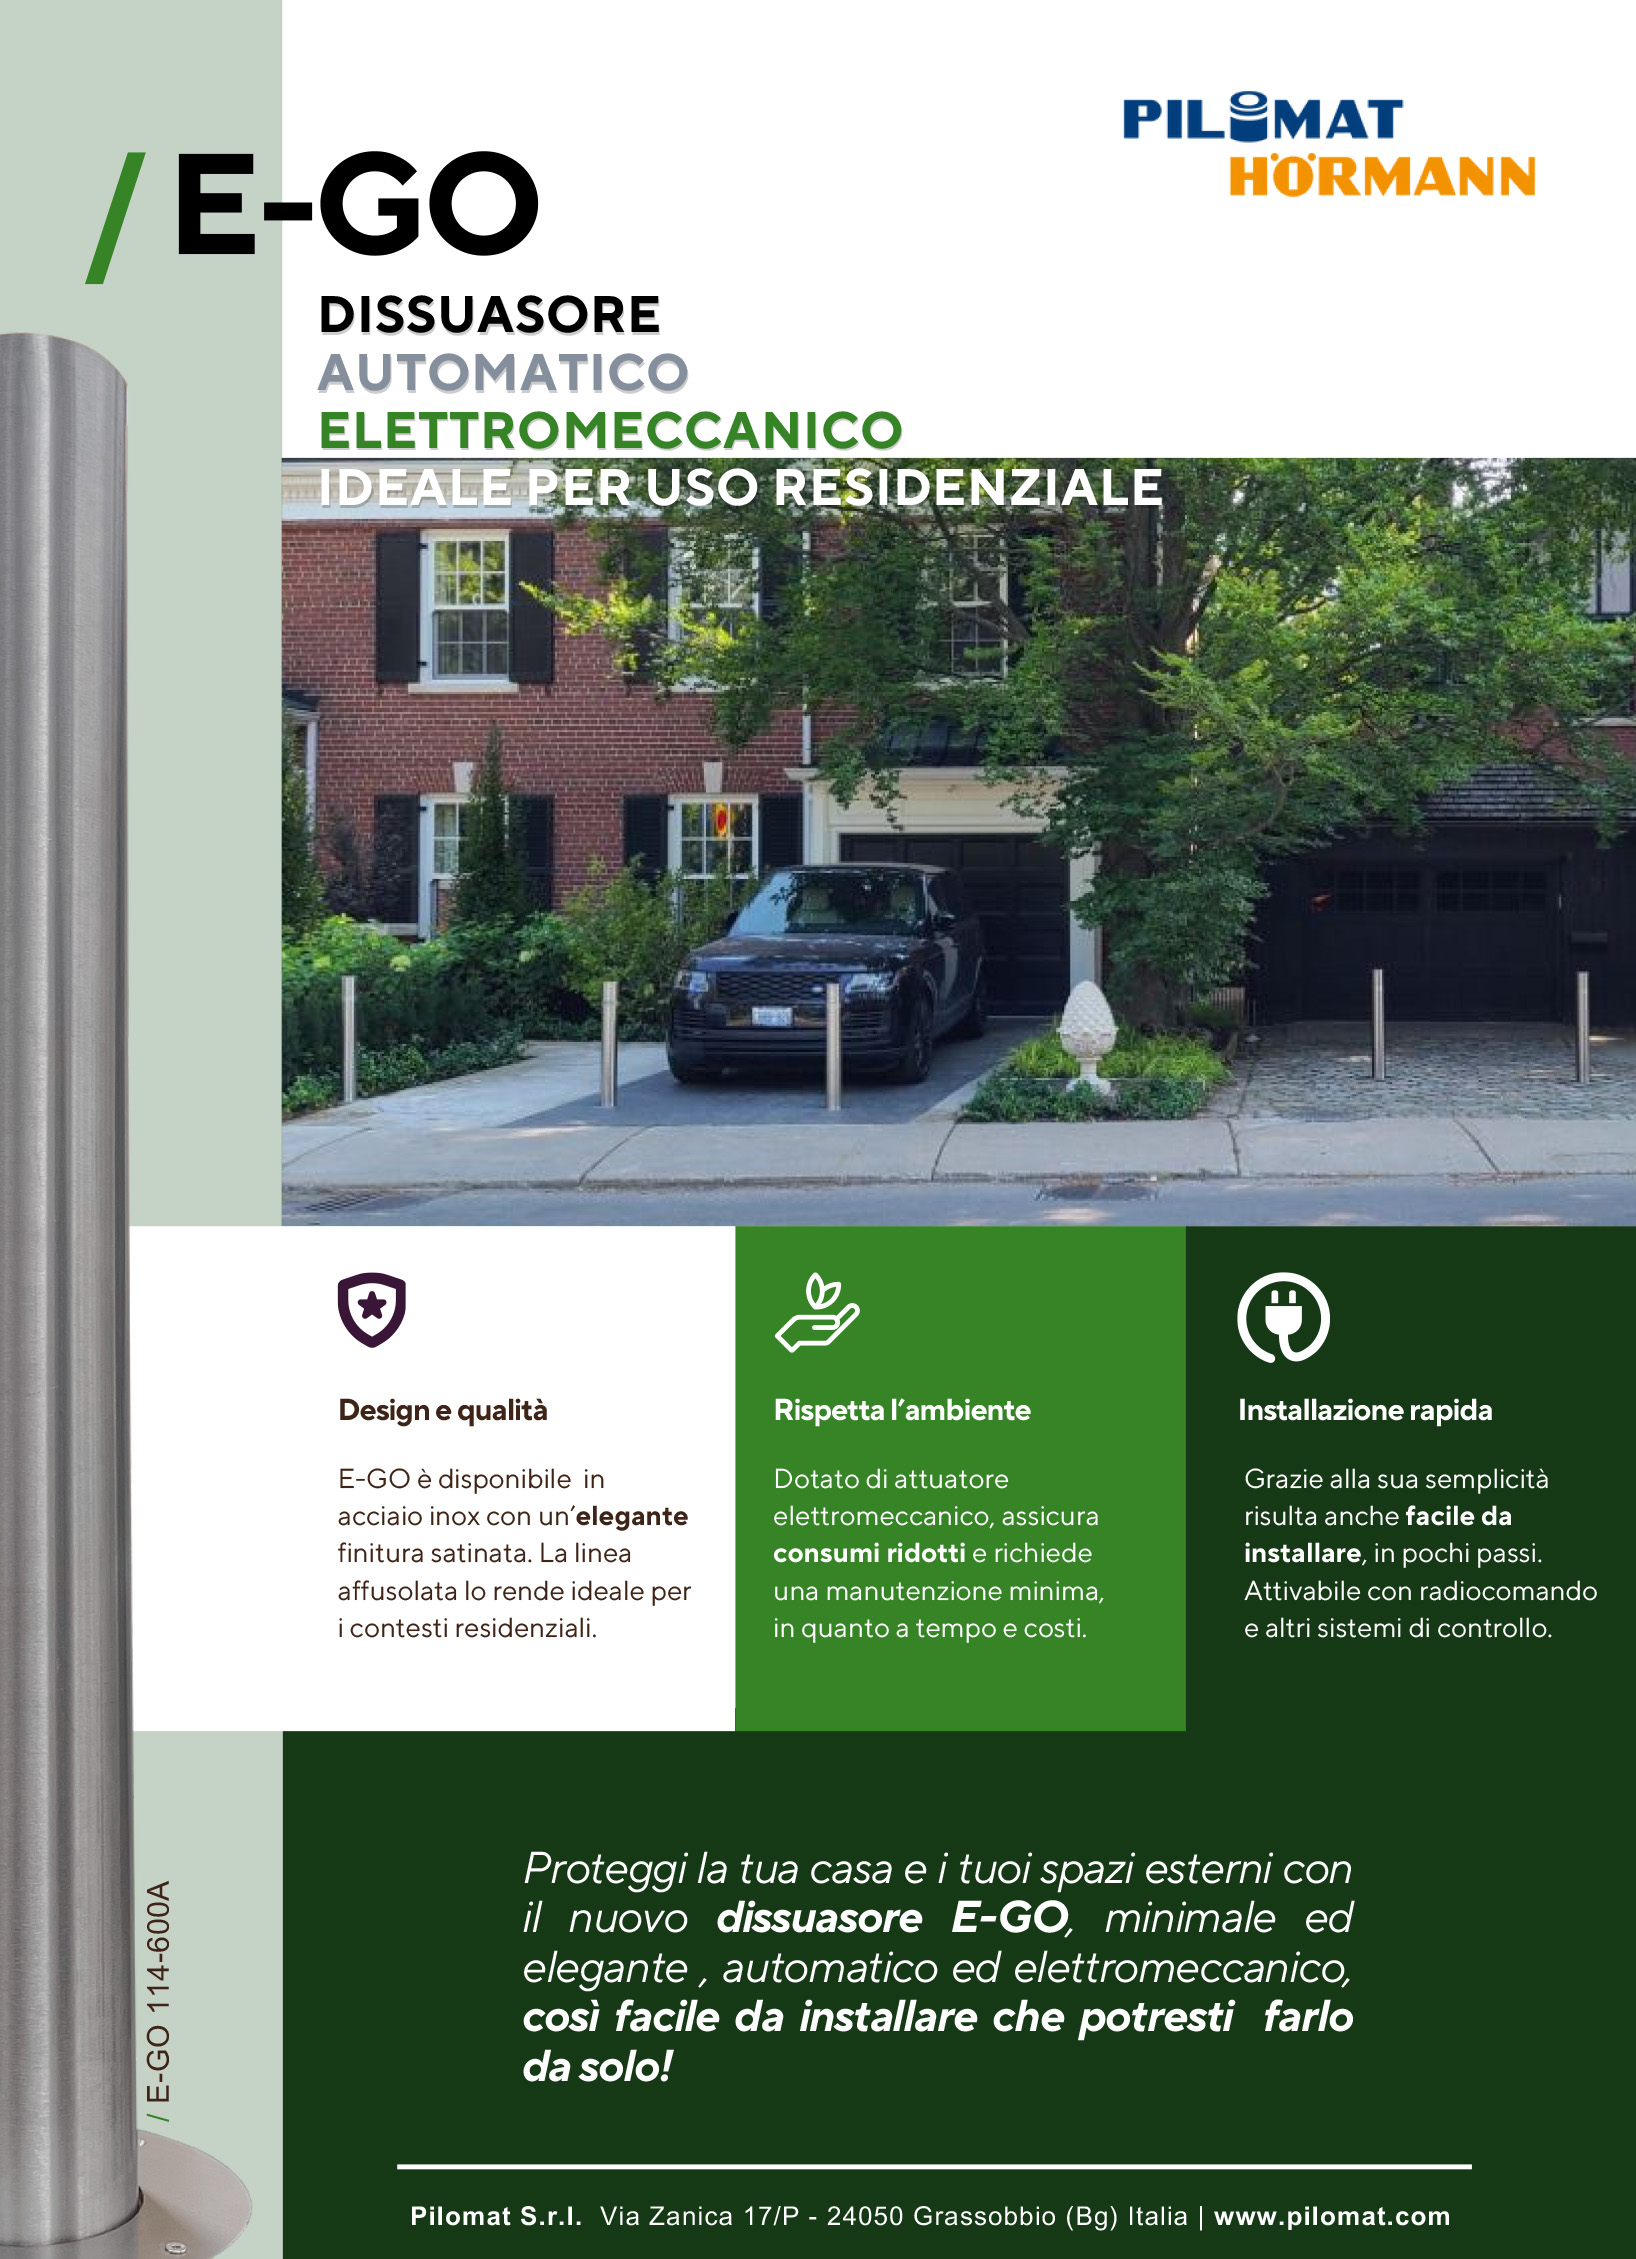 Cover page of the Pilomat E-GO automatic bollard